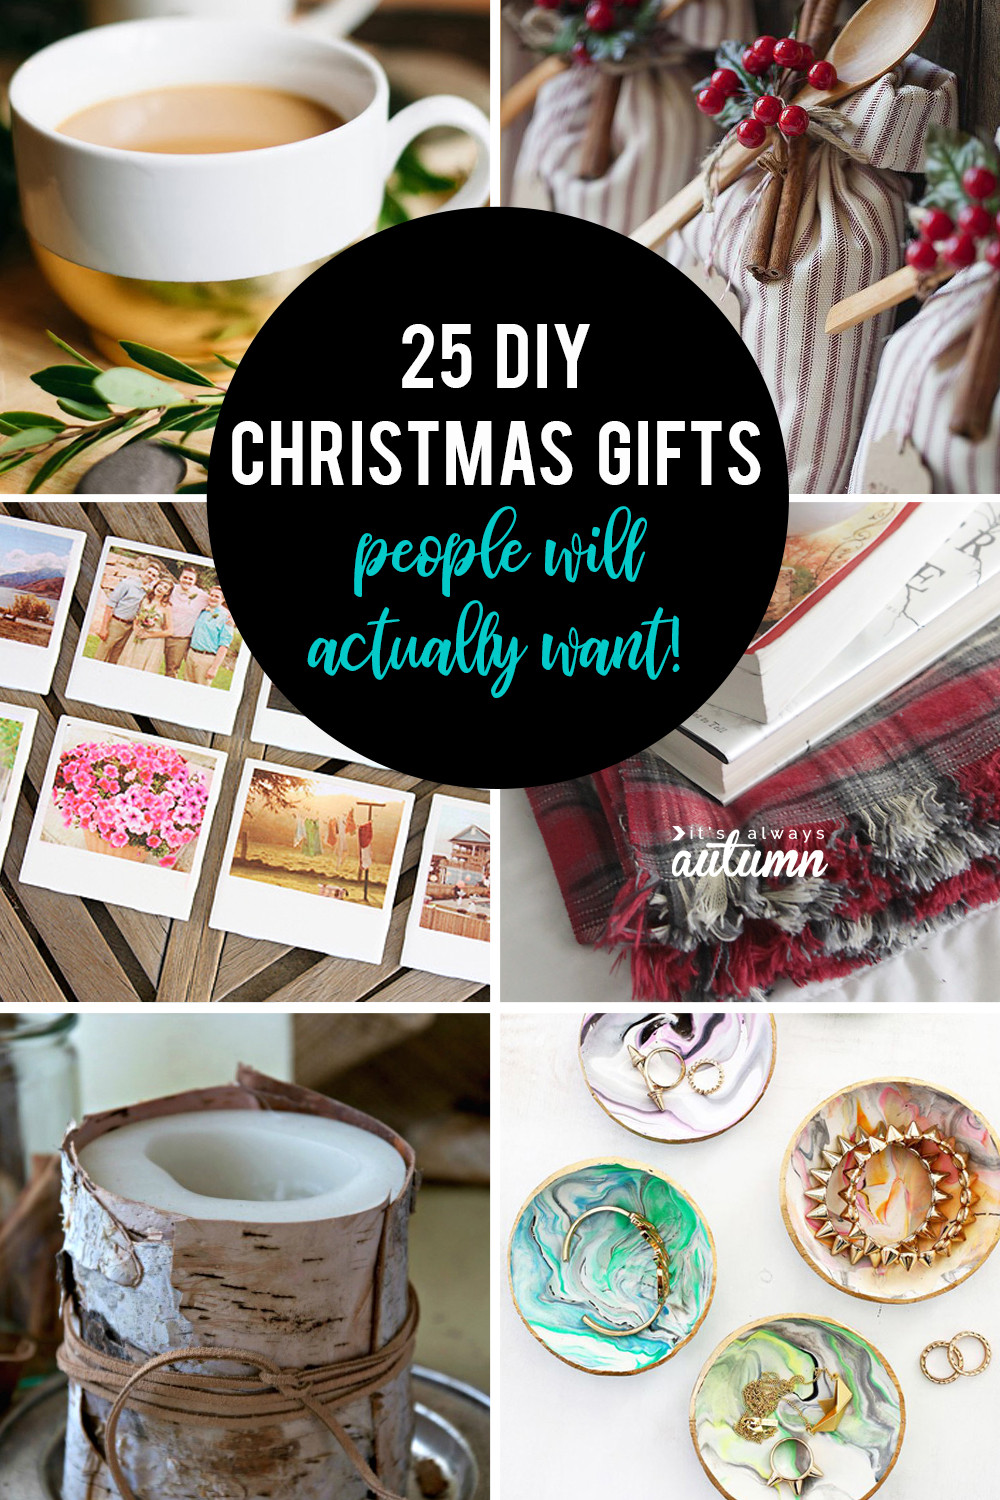 Pinterest Holiday Gift Ideas
 25 amazing DIY ts people will actually want It s